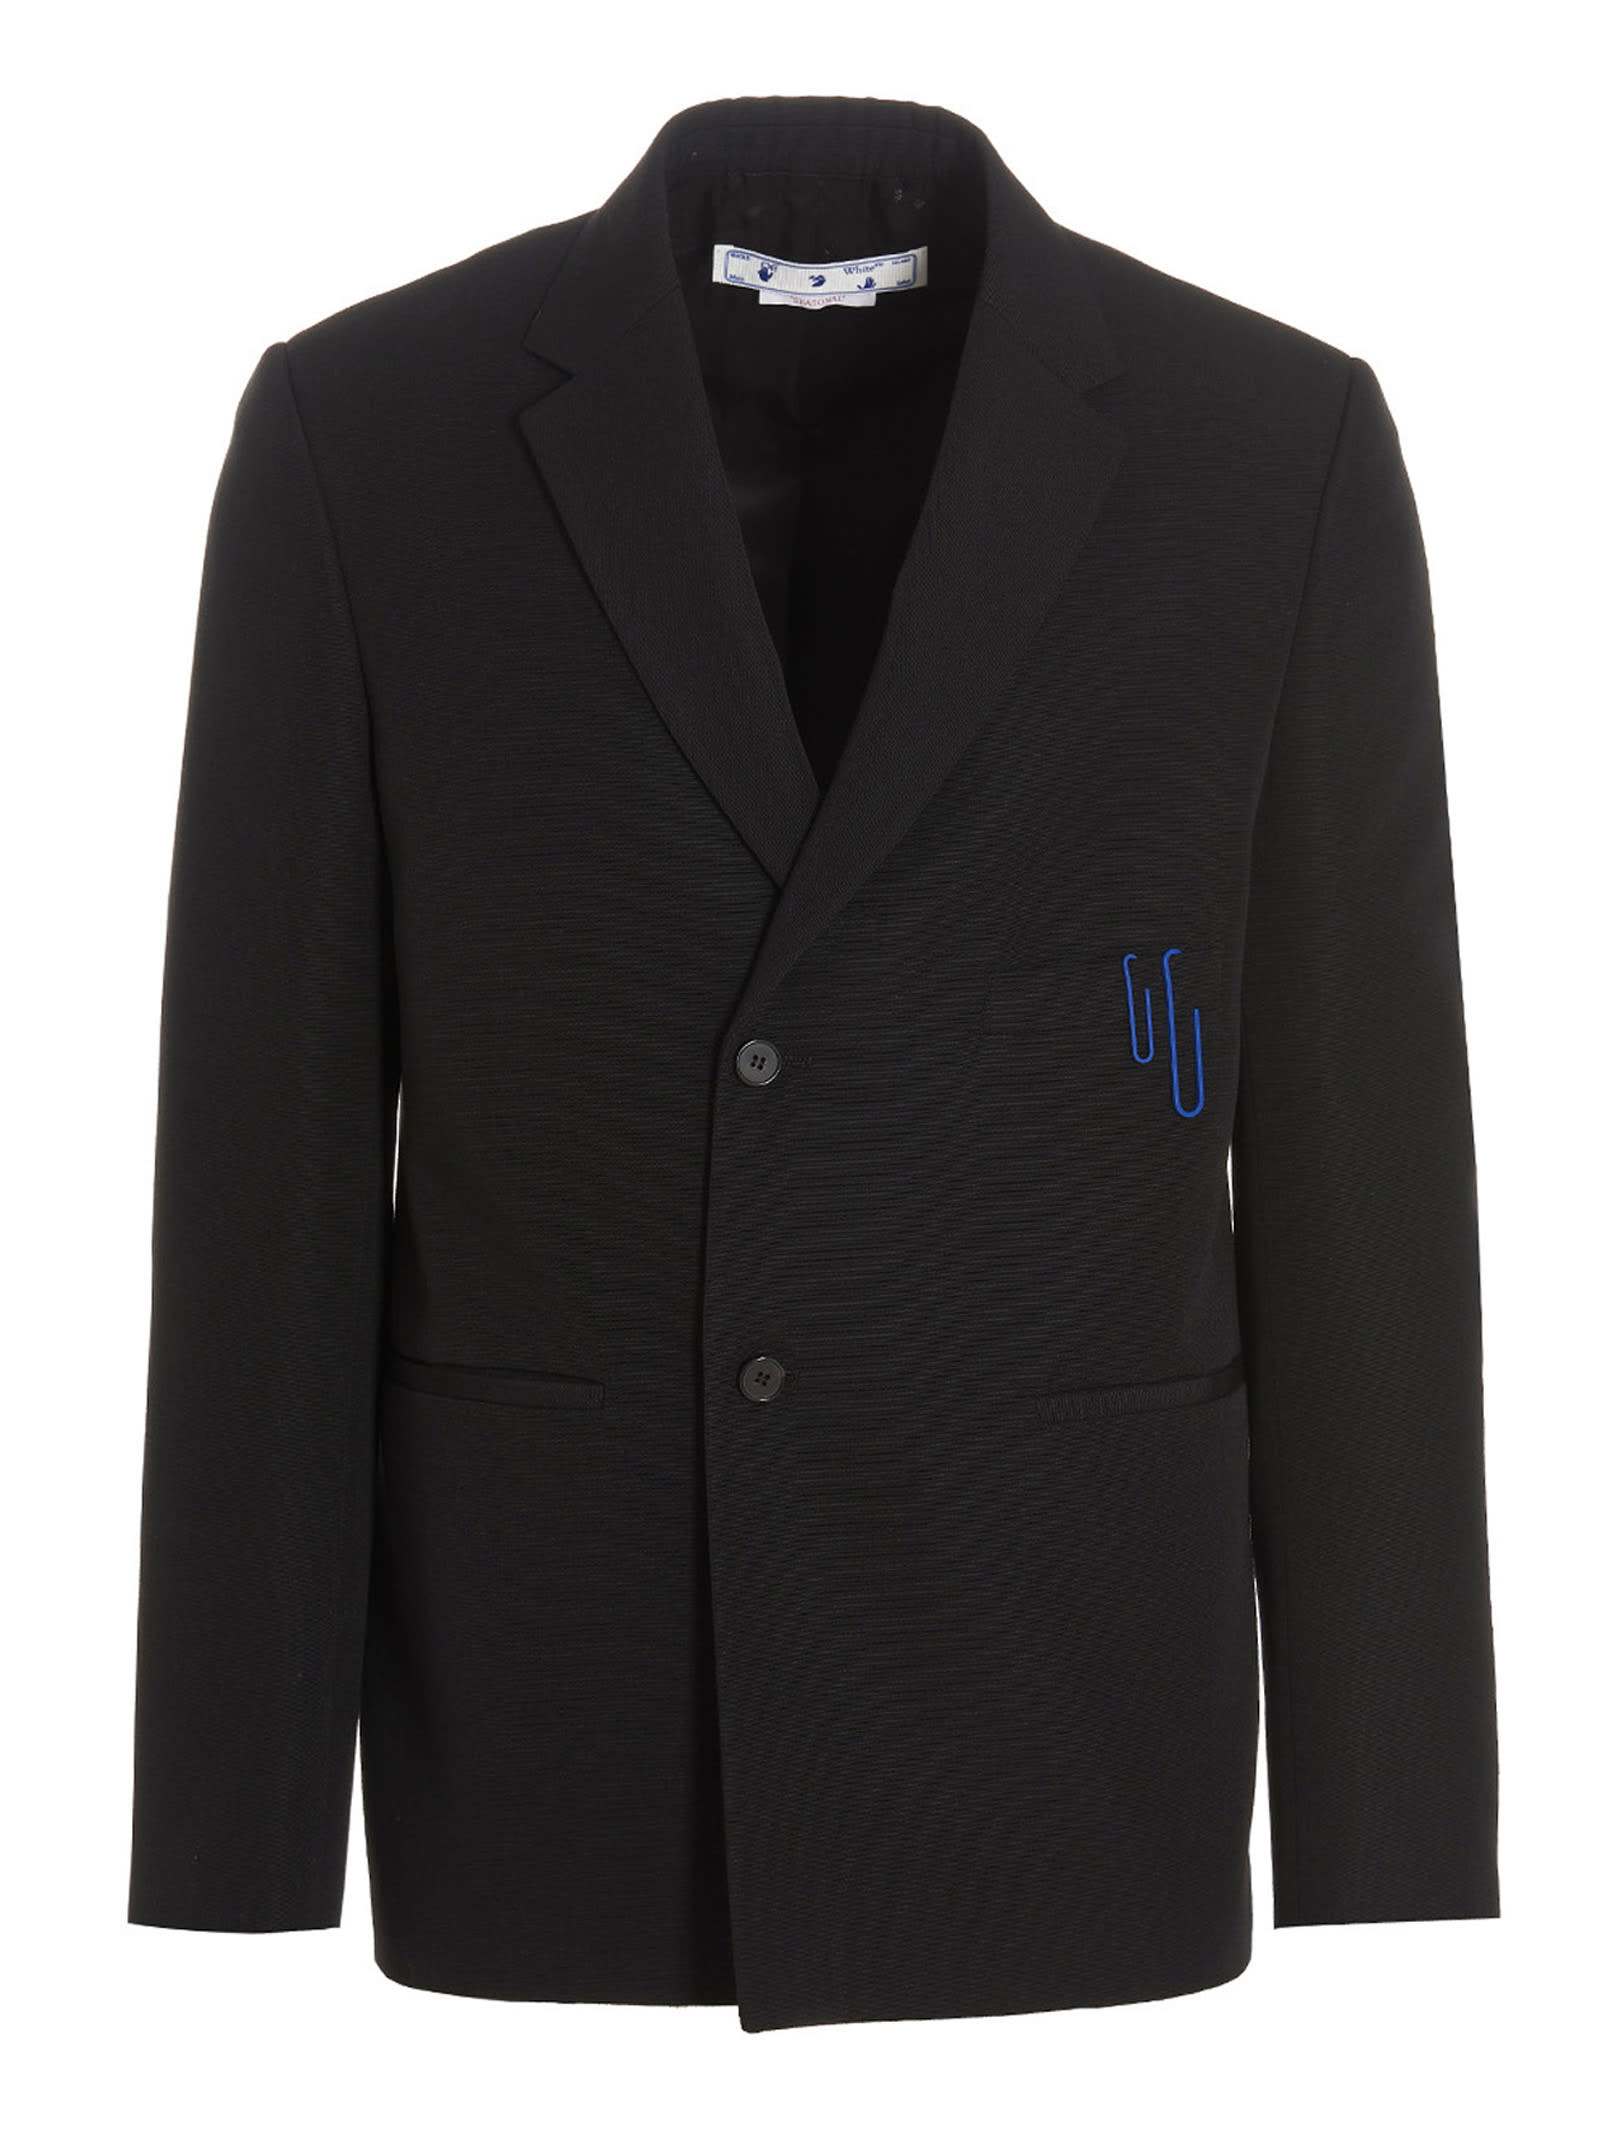 Off-White Single Breast Blazer Featuring Pocket Detailing